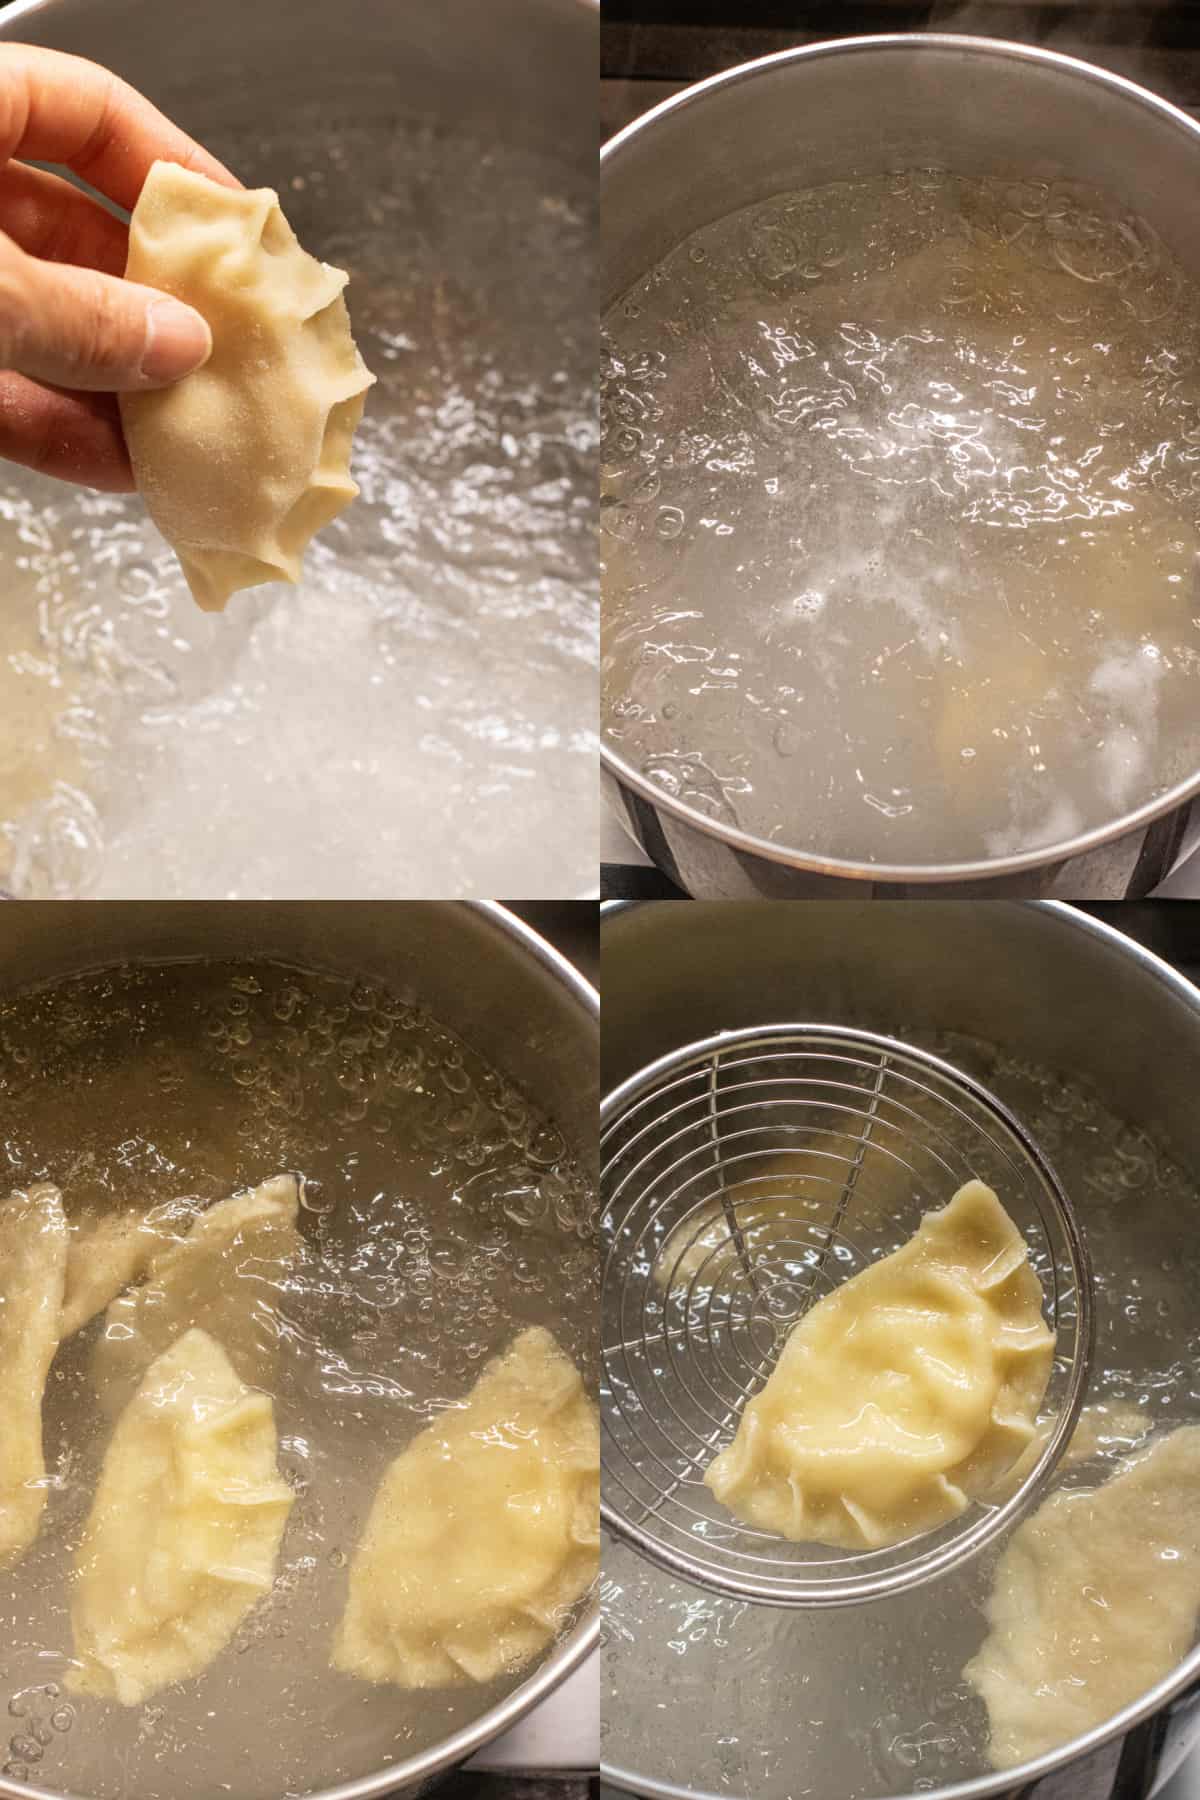 a hand putting a pierogi in a pot of boiling water, the pot of pierogis, another pot of pierogis with some floating, and then one being take out.